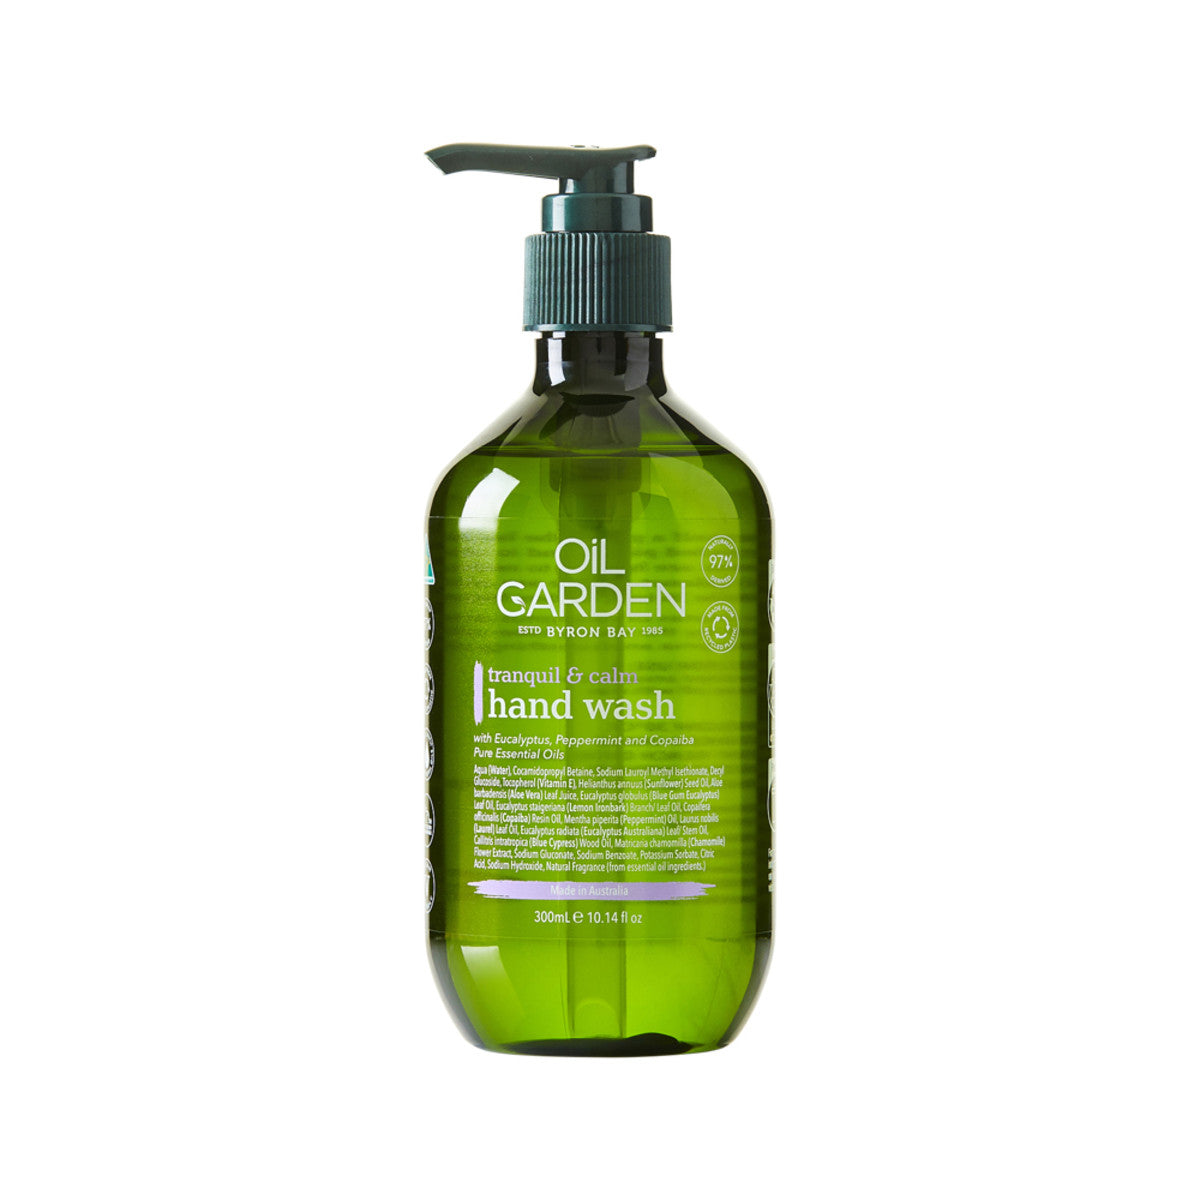 Oil Garden Hand Wash Tranquil and Calm 300ml